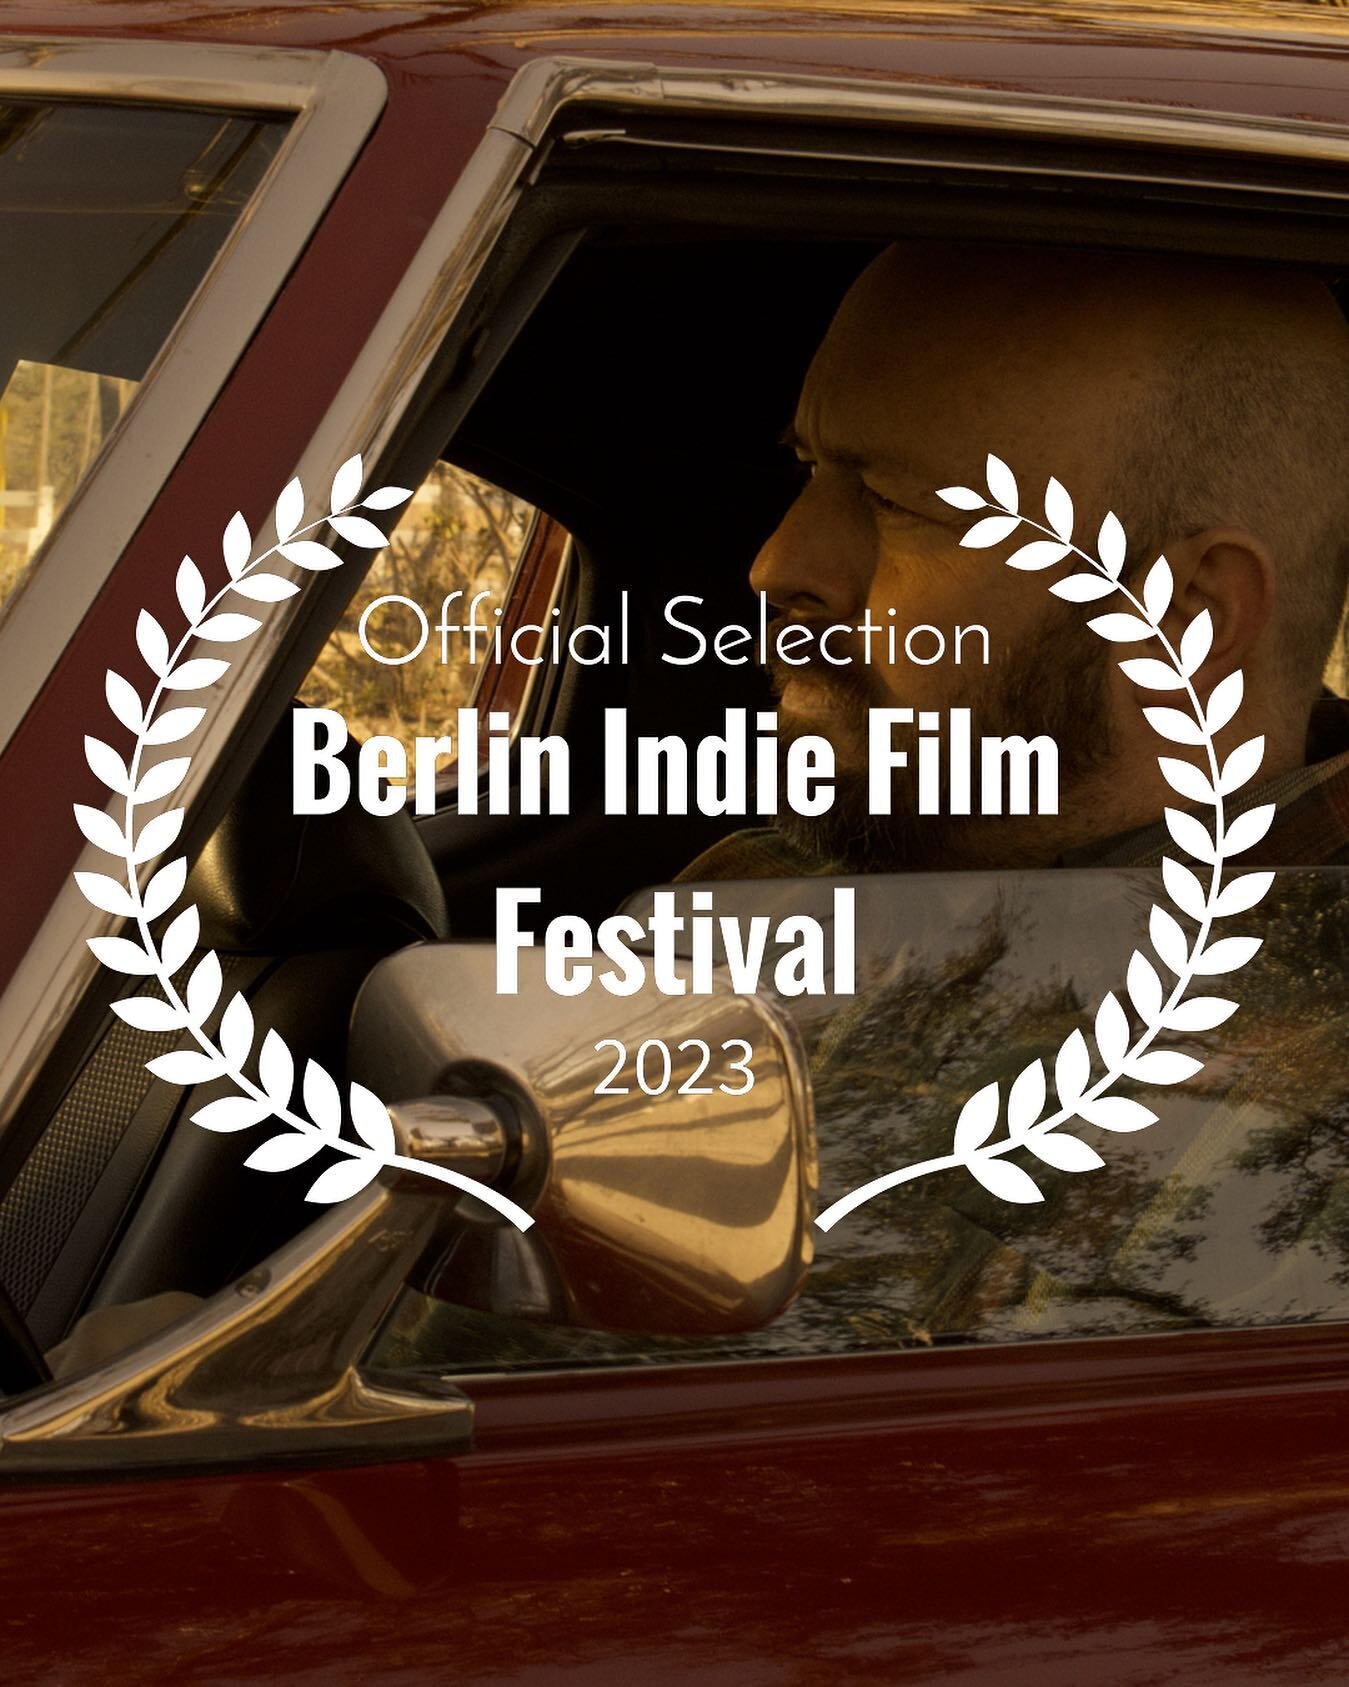 daisies is international! we're incredibly excited to announce that @berlinindiefilmfestival has officially selected @daisiesfilm for their upcoming festival. all of the love and support for daisies has been so heartwarming&mdash;thank you, thank you